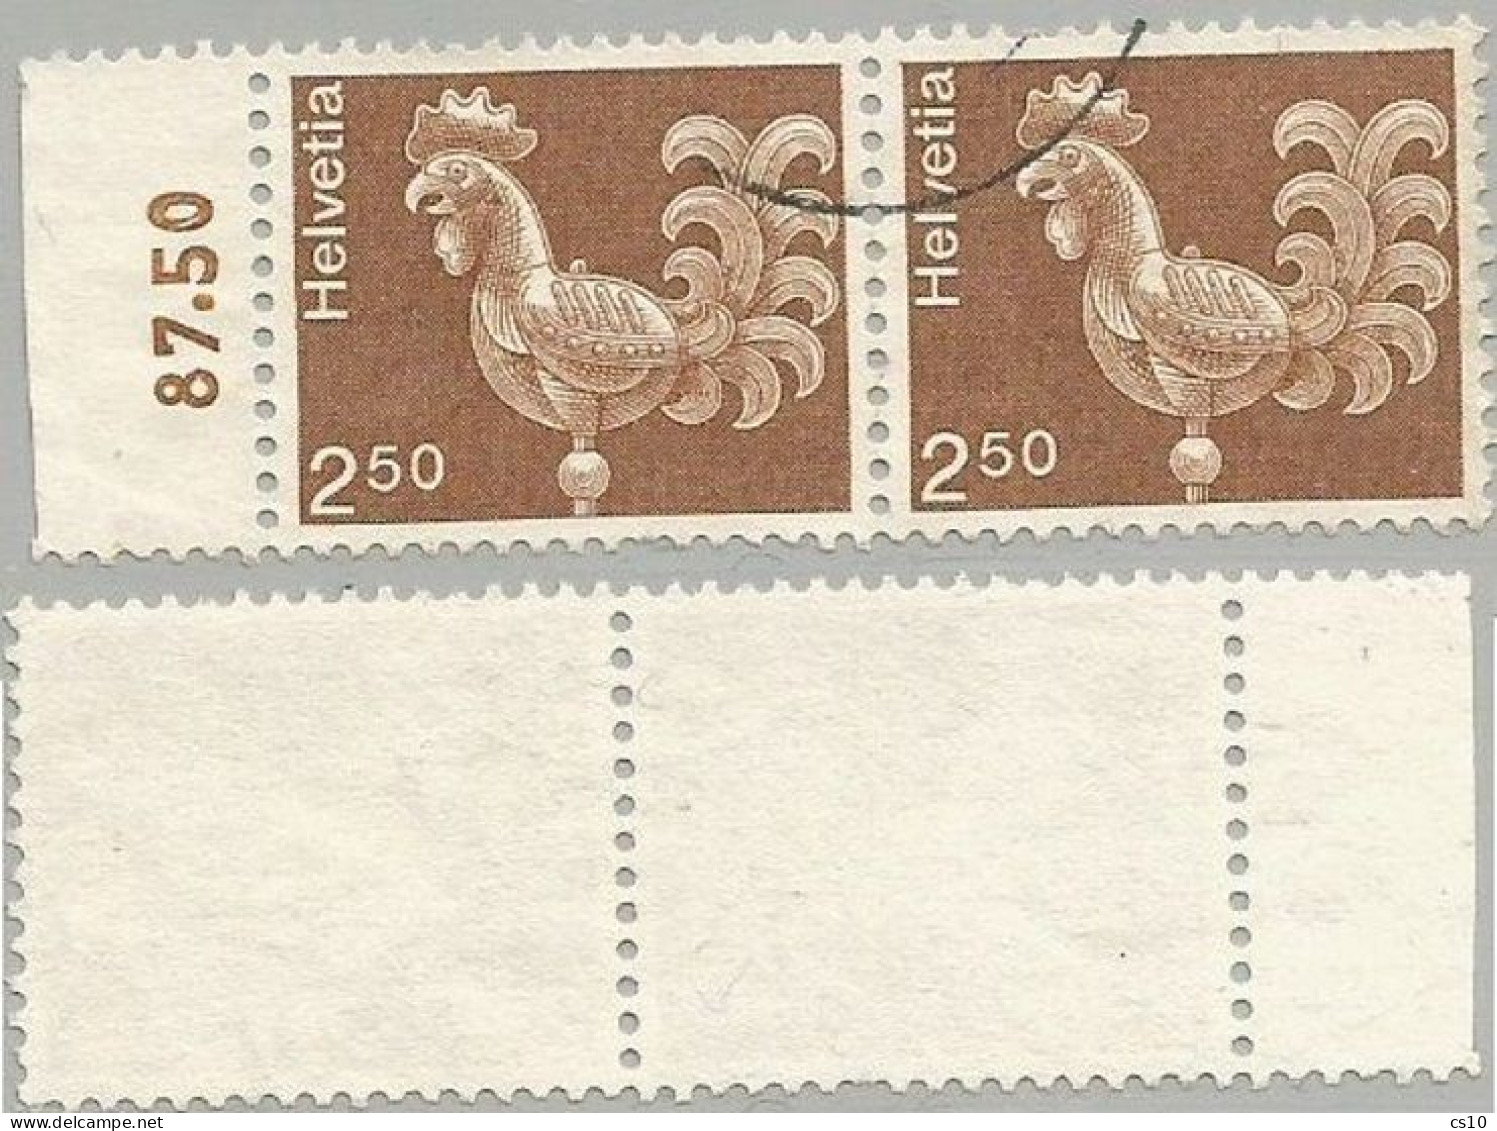 Suisse 1975 Artworks Wheatercock FS.2,50 - Scarce Variety NON FLUO PAPER - #2 Pcs In Horiz. Pair With Sheet Margin - Marcofilia